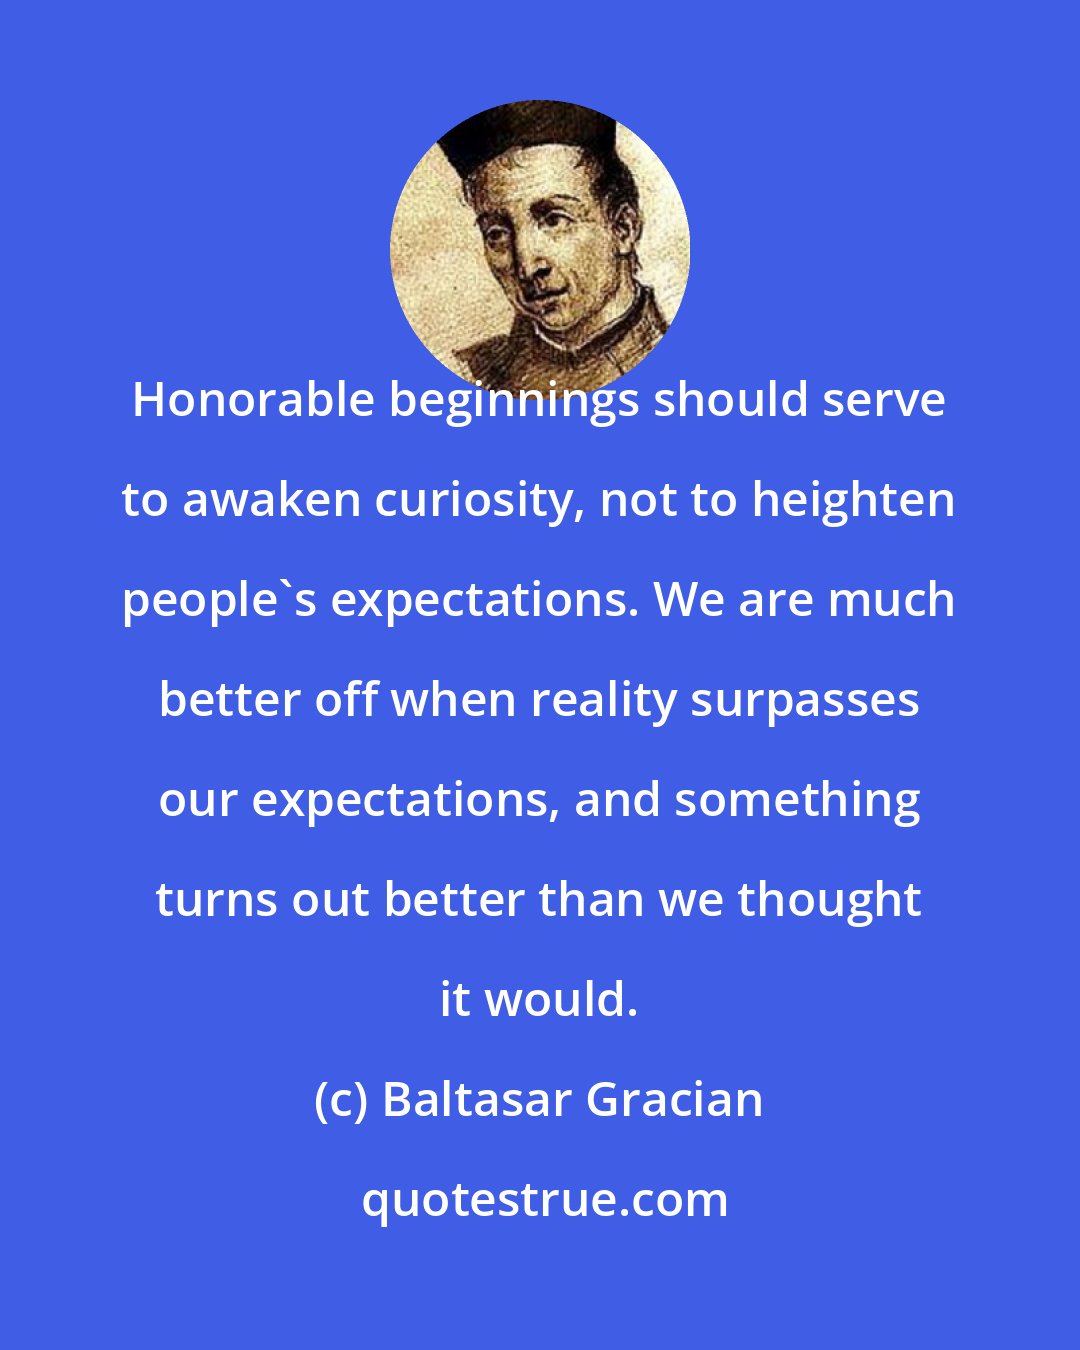 Baltasar Gracian: Honorable beginnings should serve to awaken curiosity, not to heighten people's expectations. We are much better off when reality surpasses our expectations, and something turns out better than we thought it would.